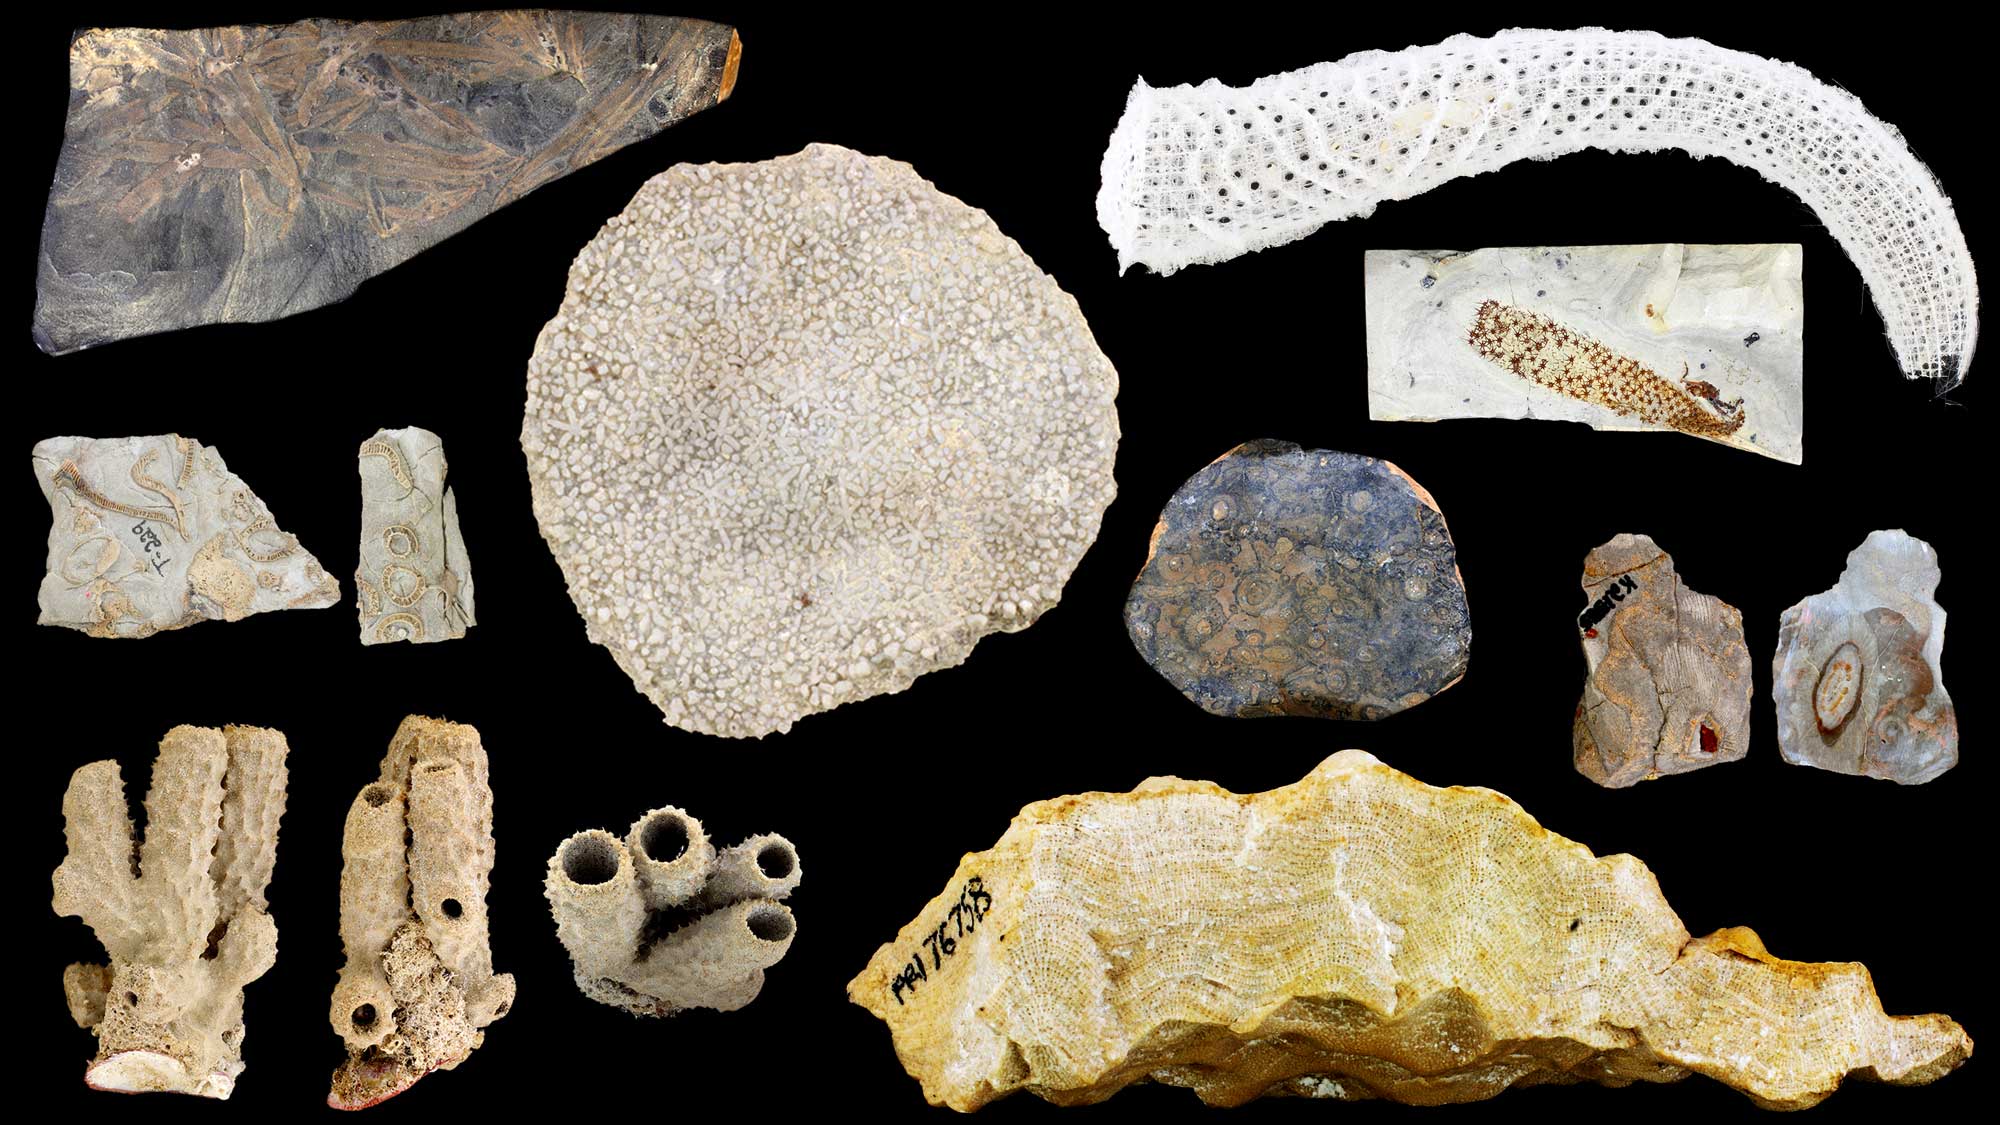 Image of a variety of modern and fossil sponges